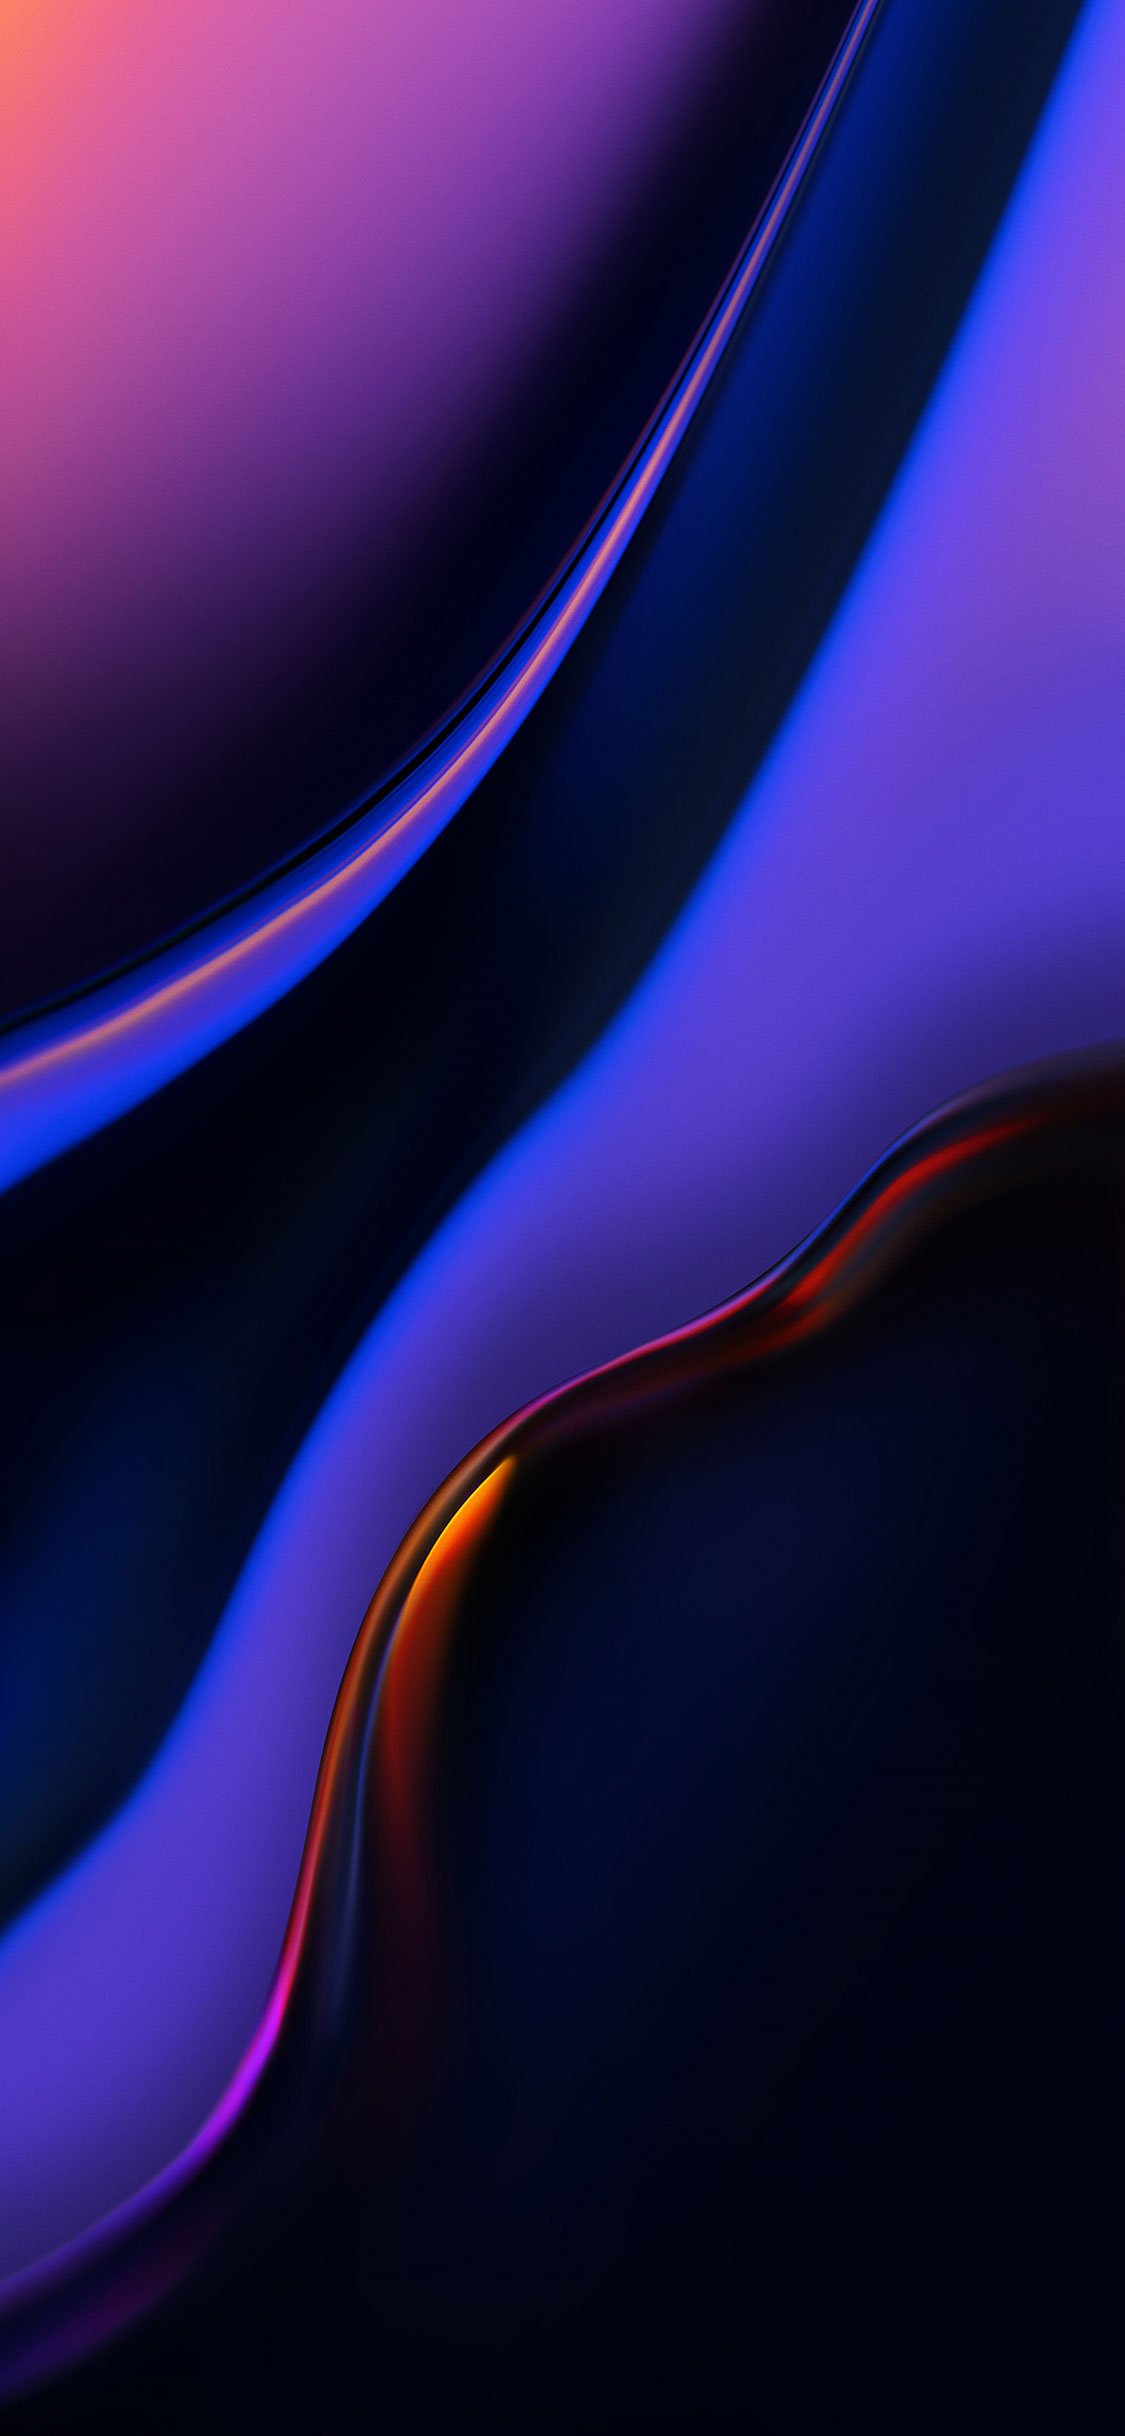 60+ Latest Best iPhone X Wallpapers